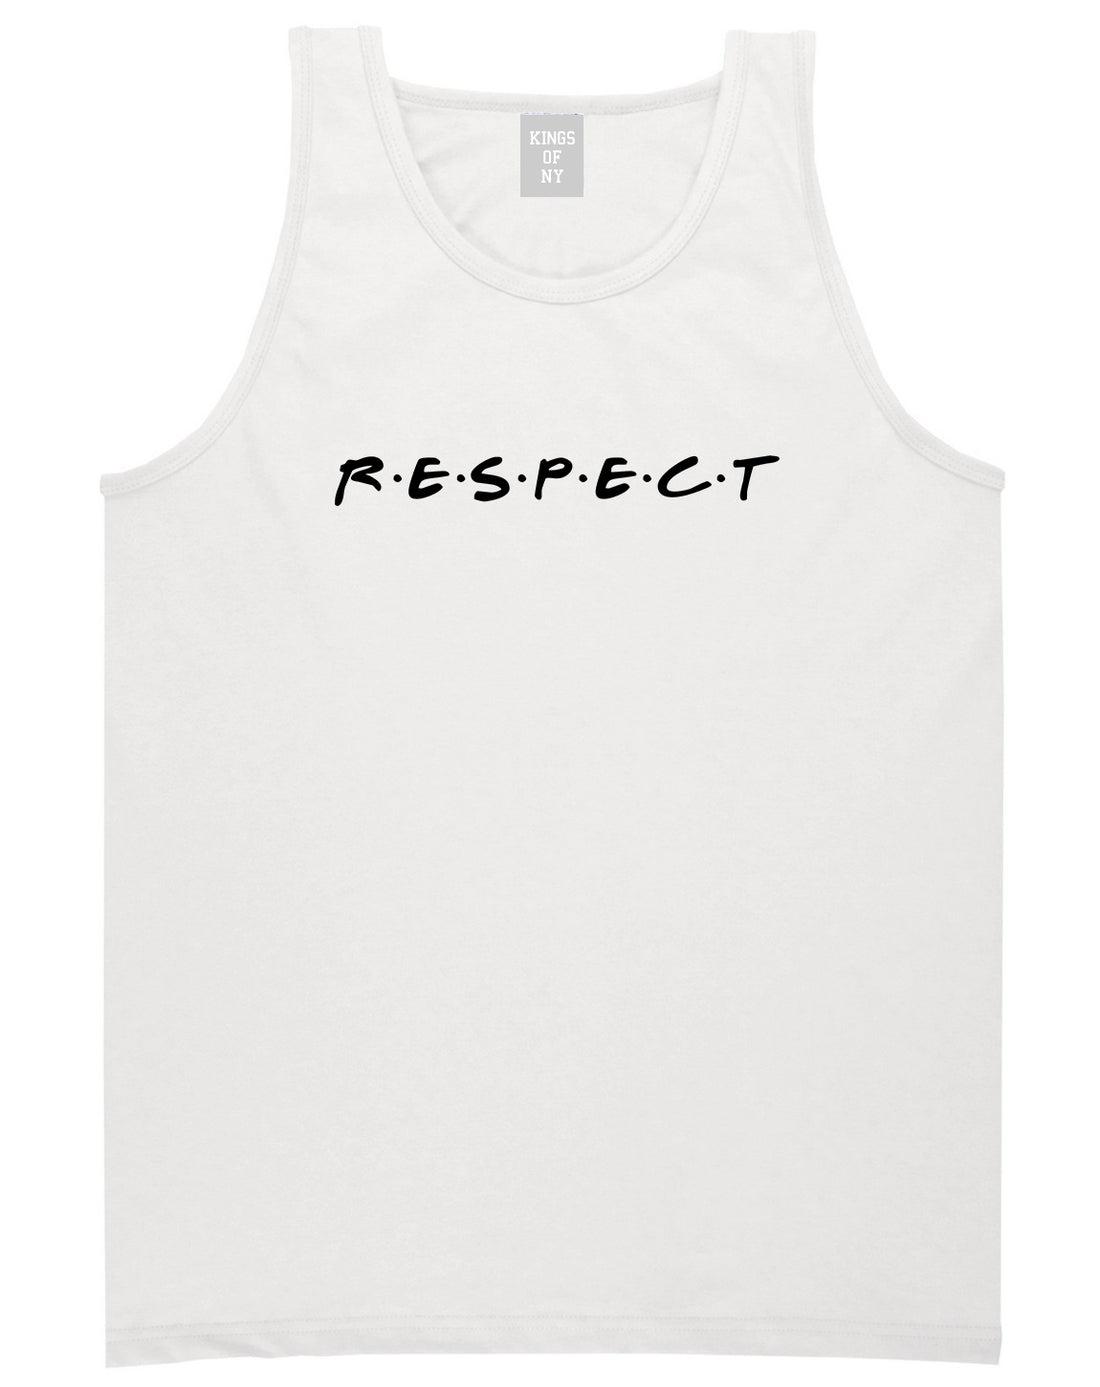 Respect Aretha Mens Tank Top Shirt White by Kings Of NY